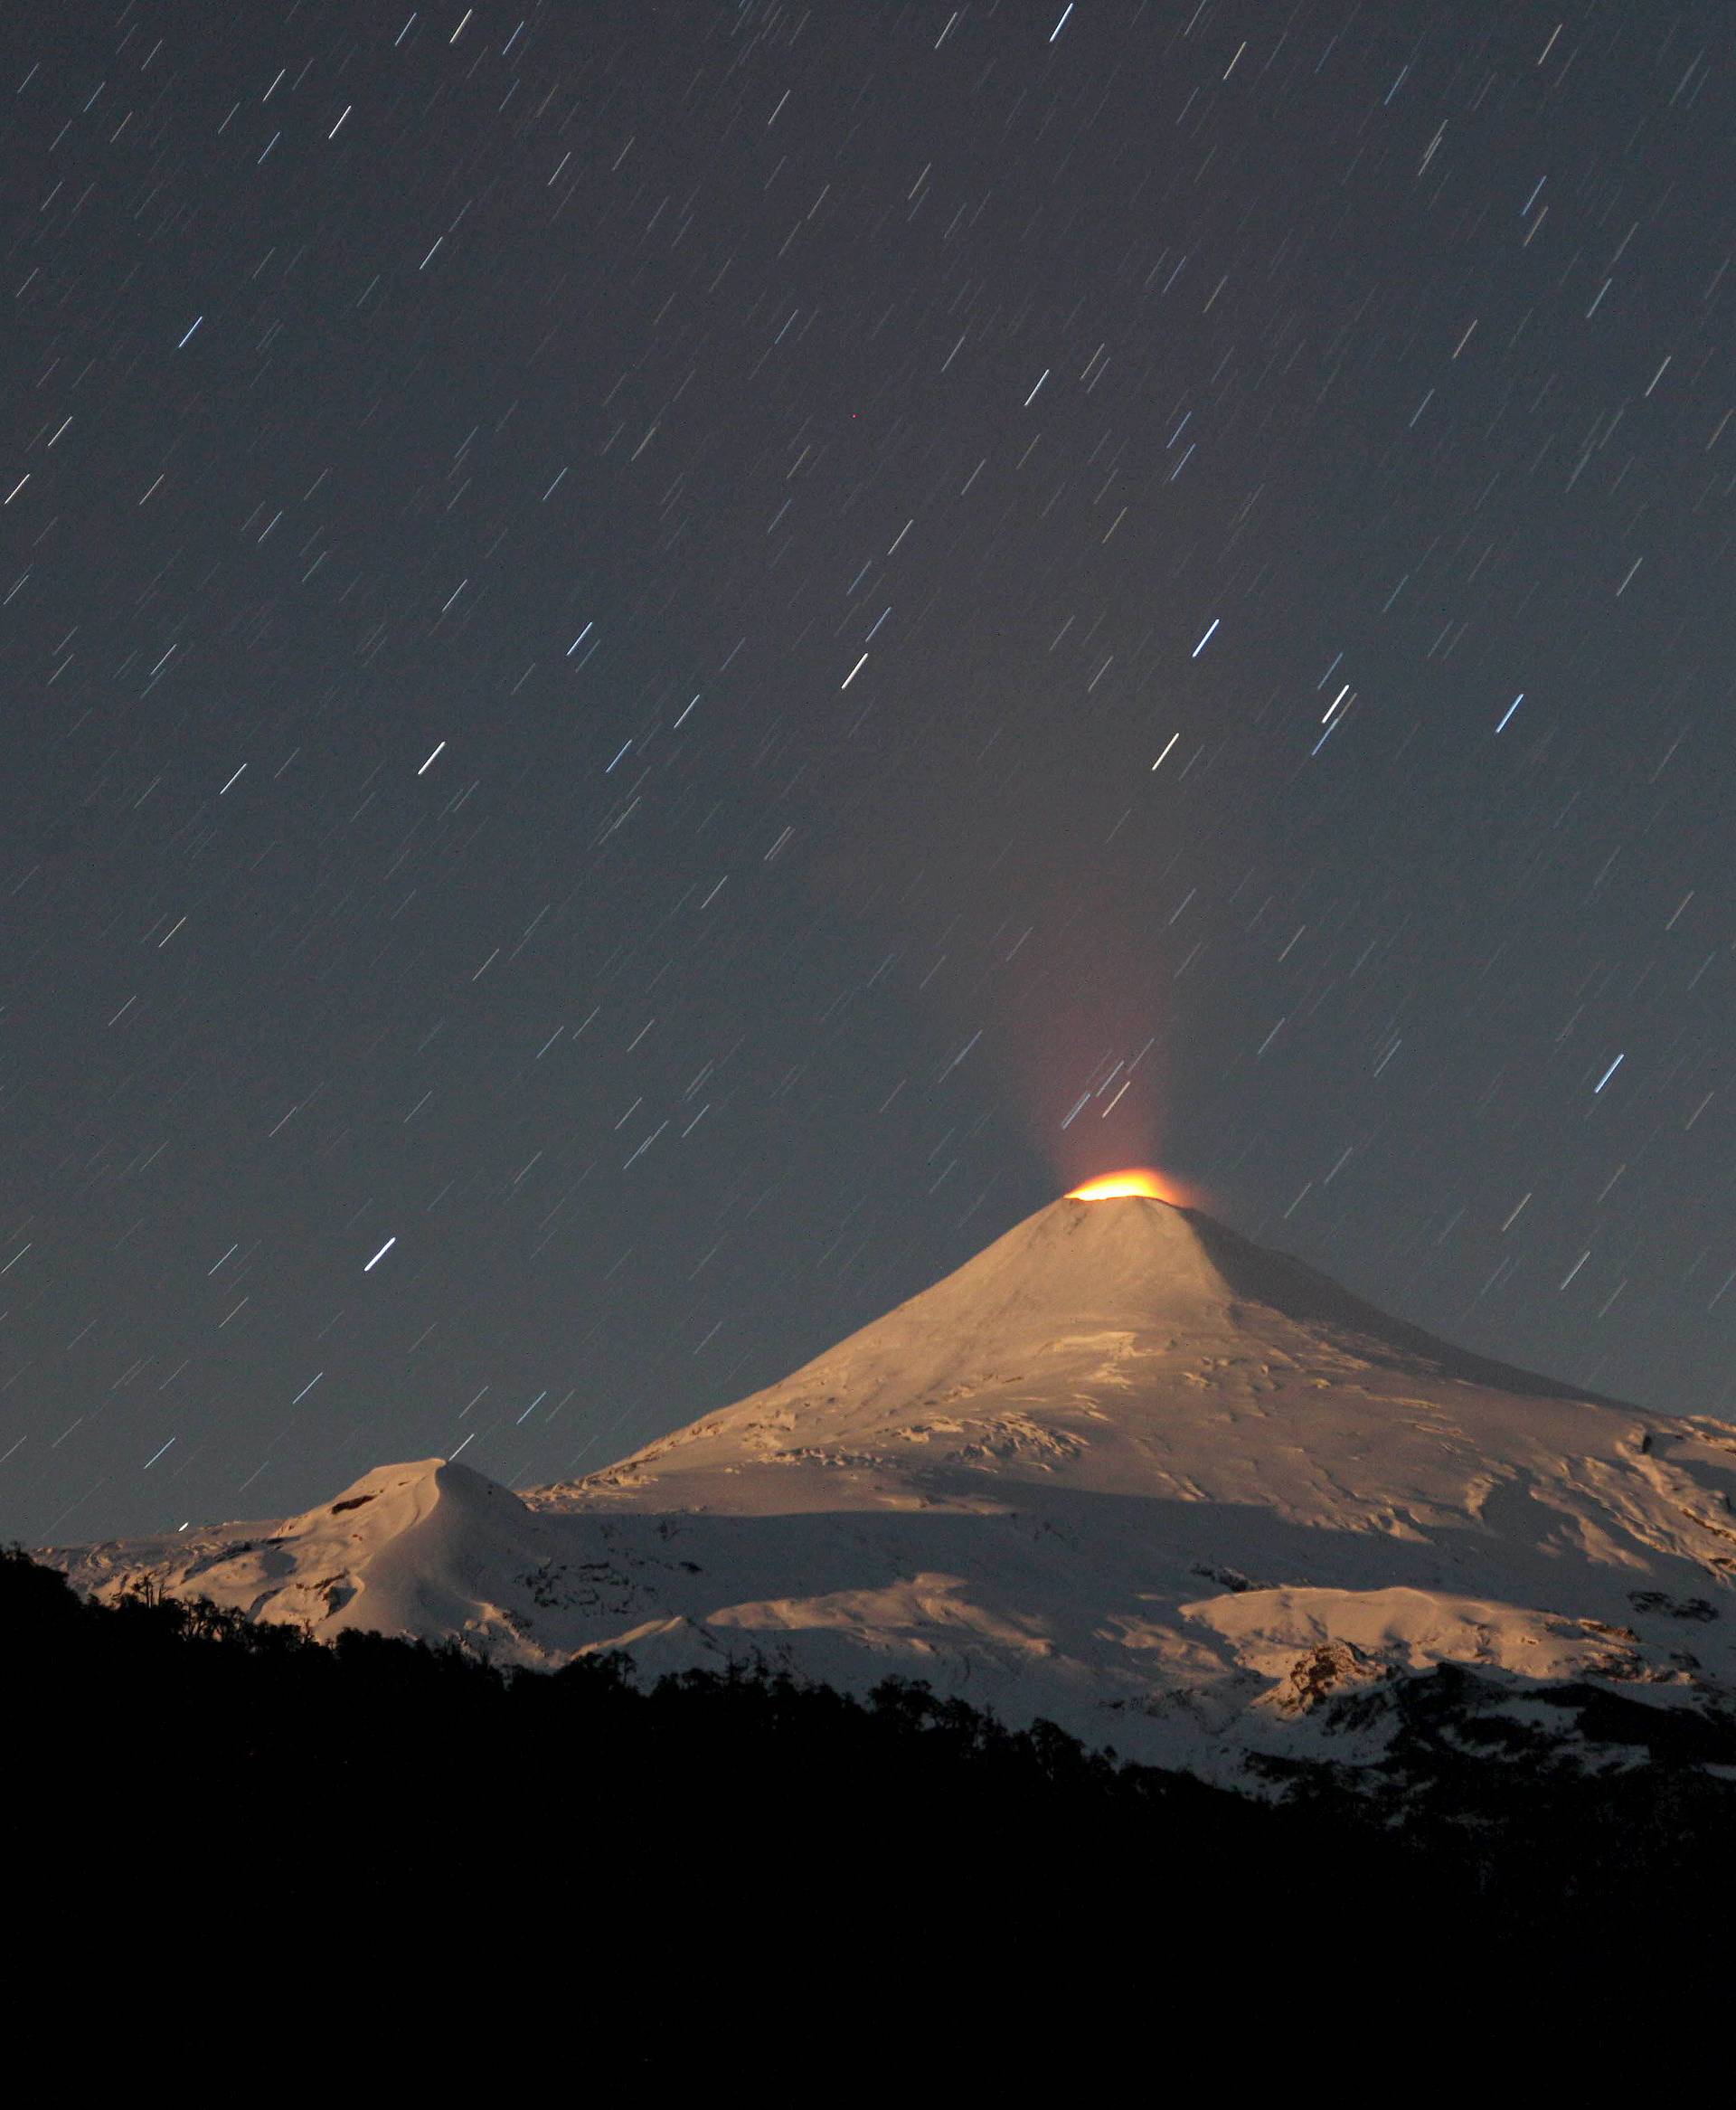 Villarrica volcano is seen at night in Chile